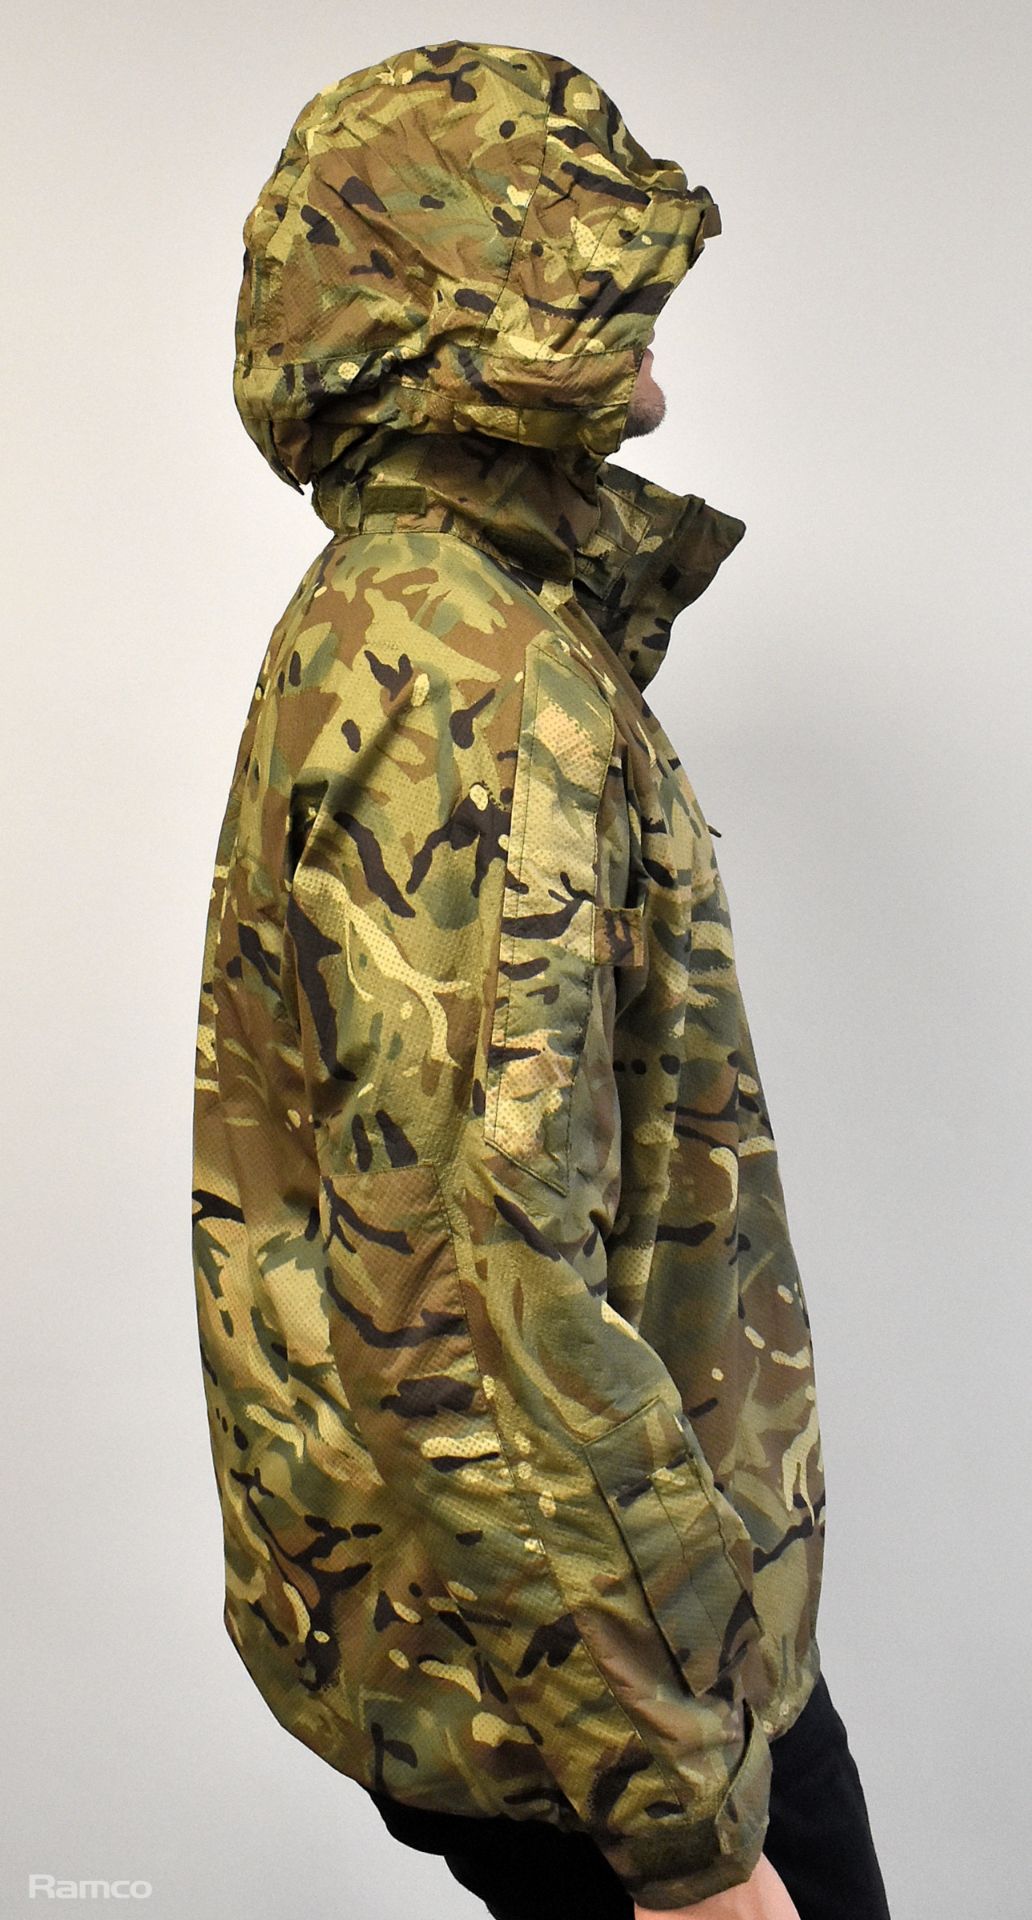 80x British Army MTP waterproof lightweight jackets - mixed grades and sizes - Image 6 of 11